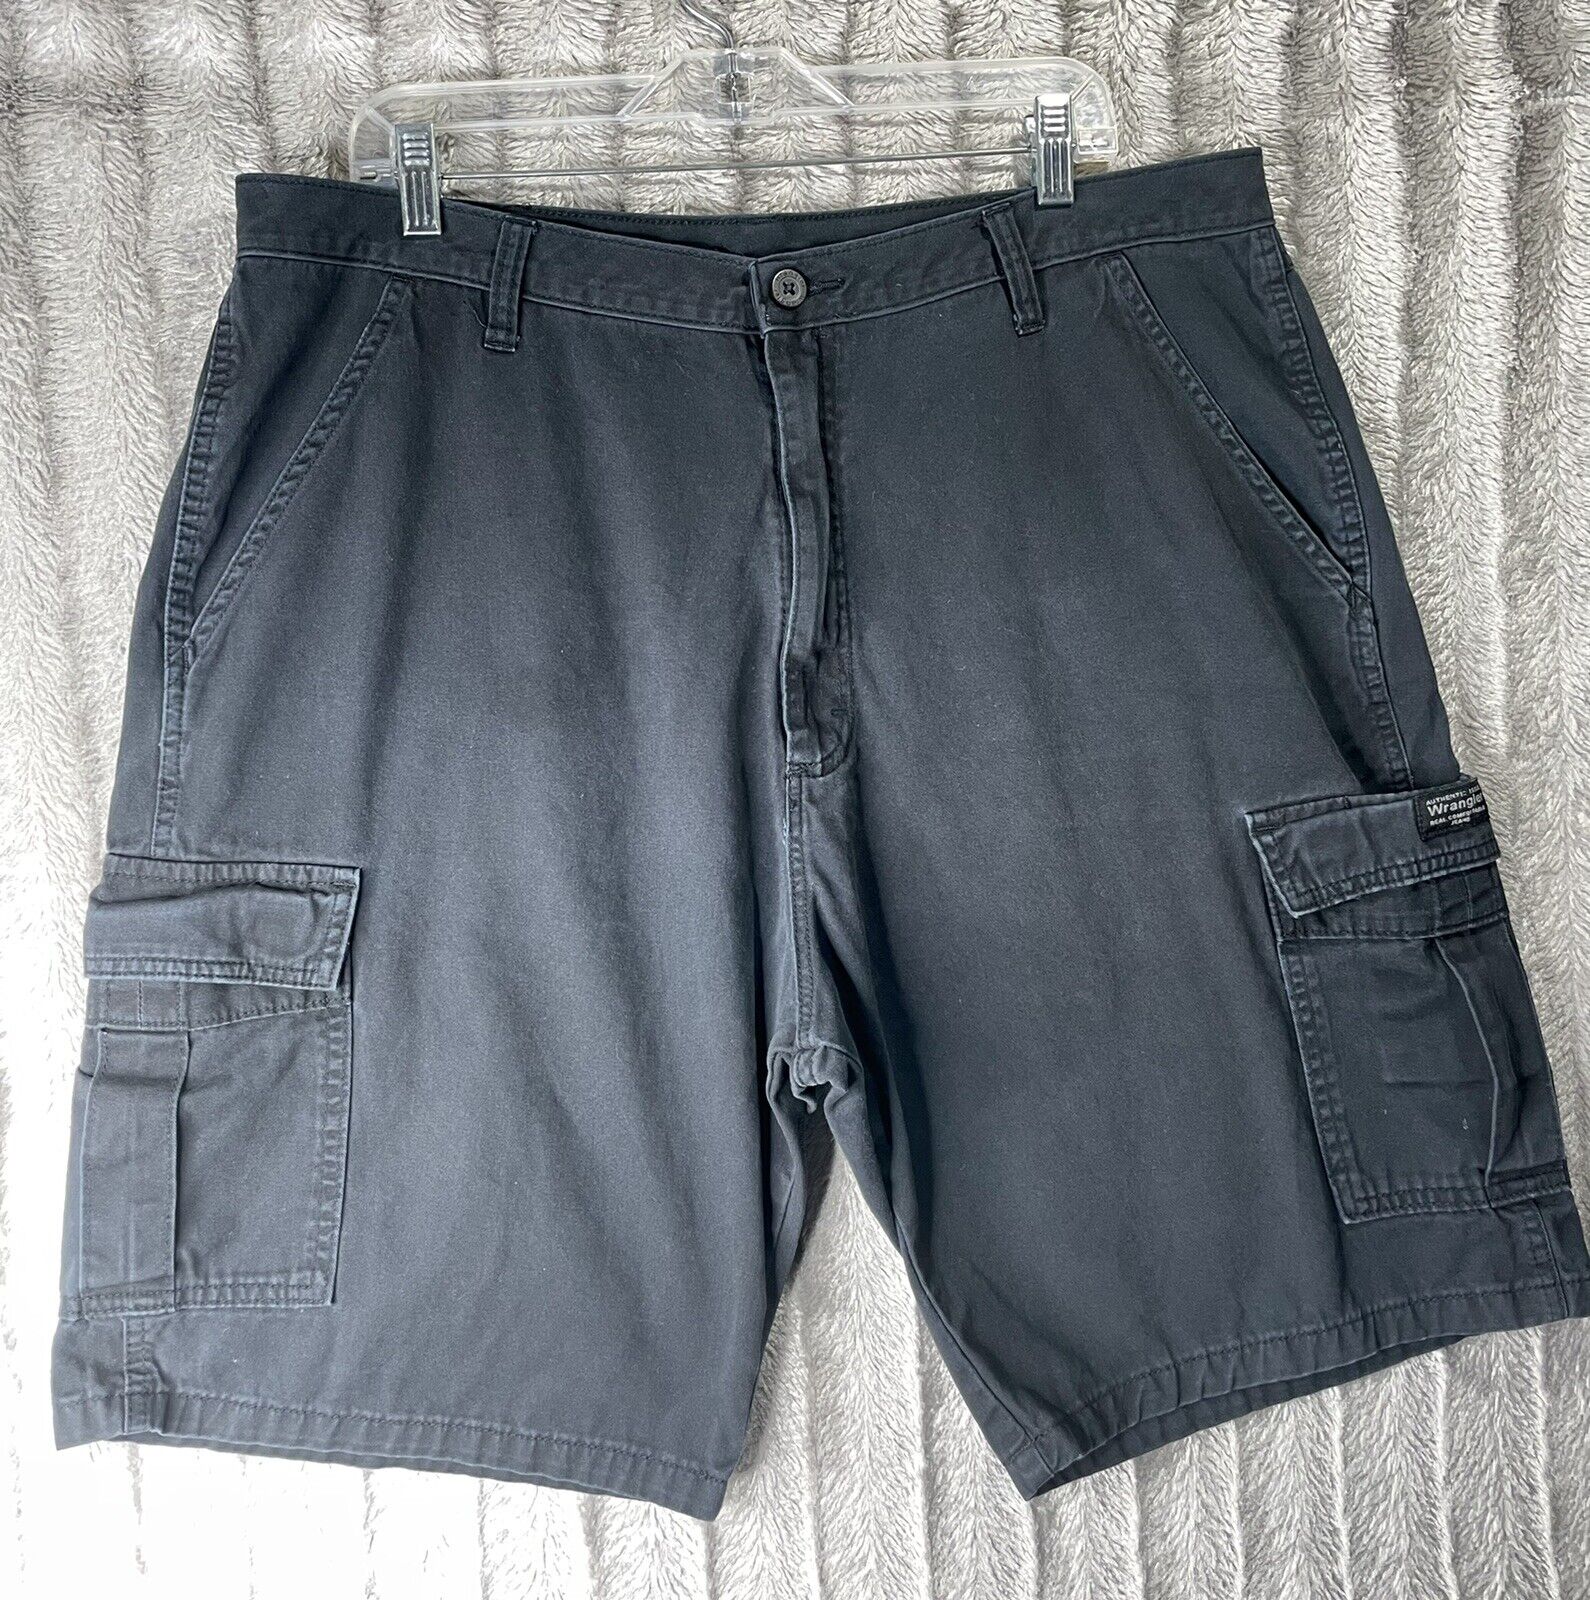 Actualizar 57+ imagen authentic issue wrangler real comfortable shorts